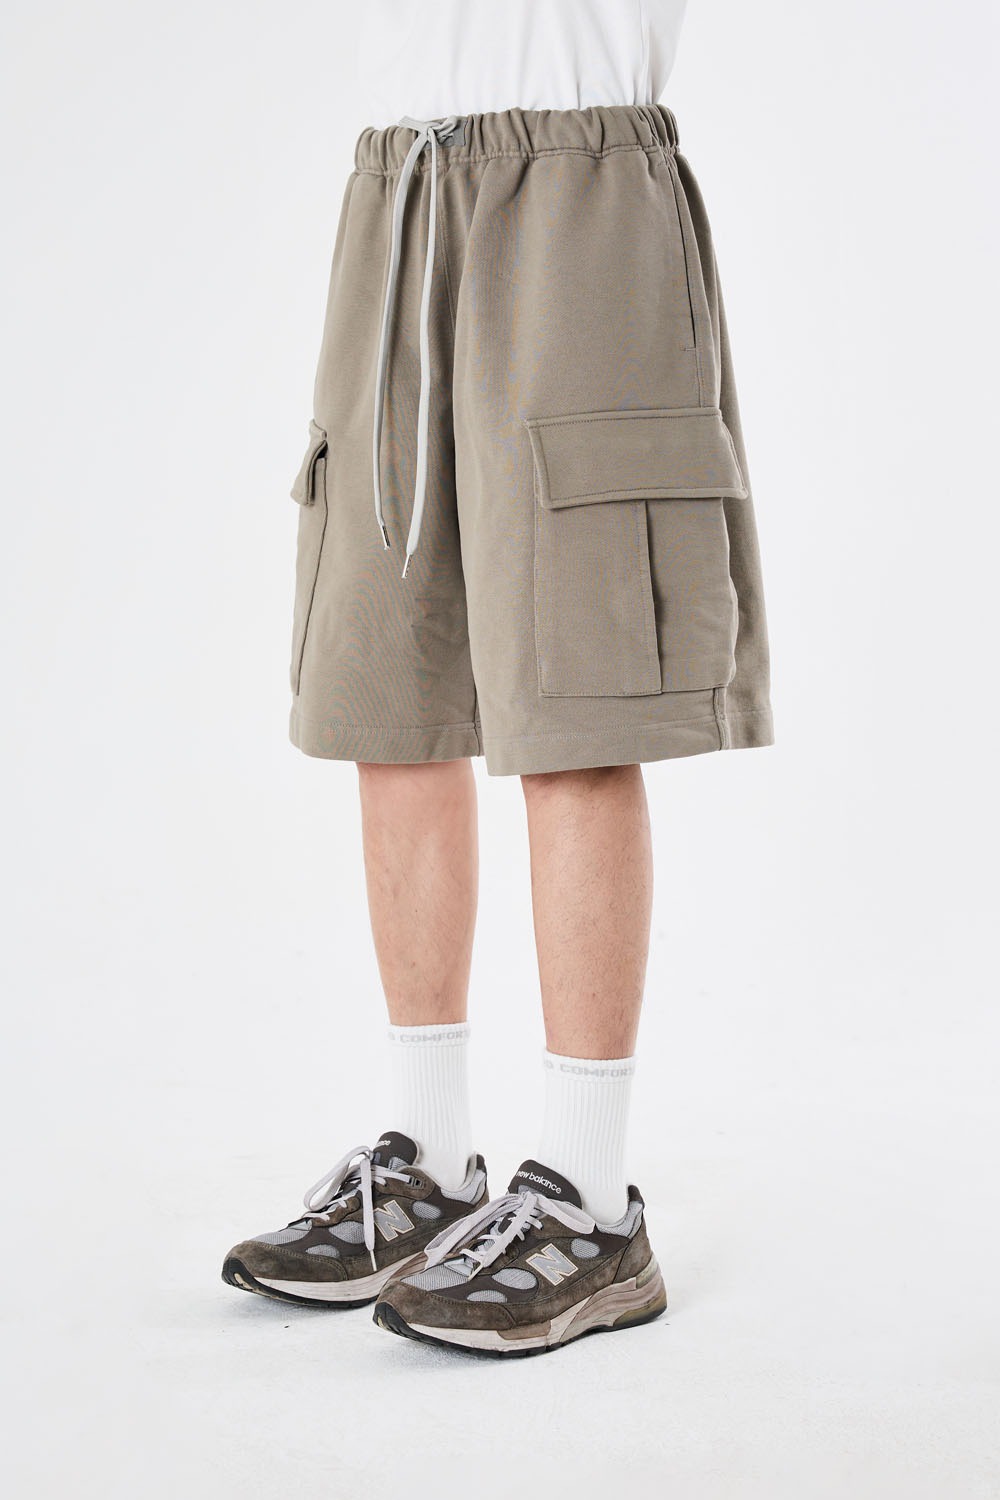 Over Mil Sweat Shorts-Olive Gray